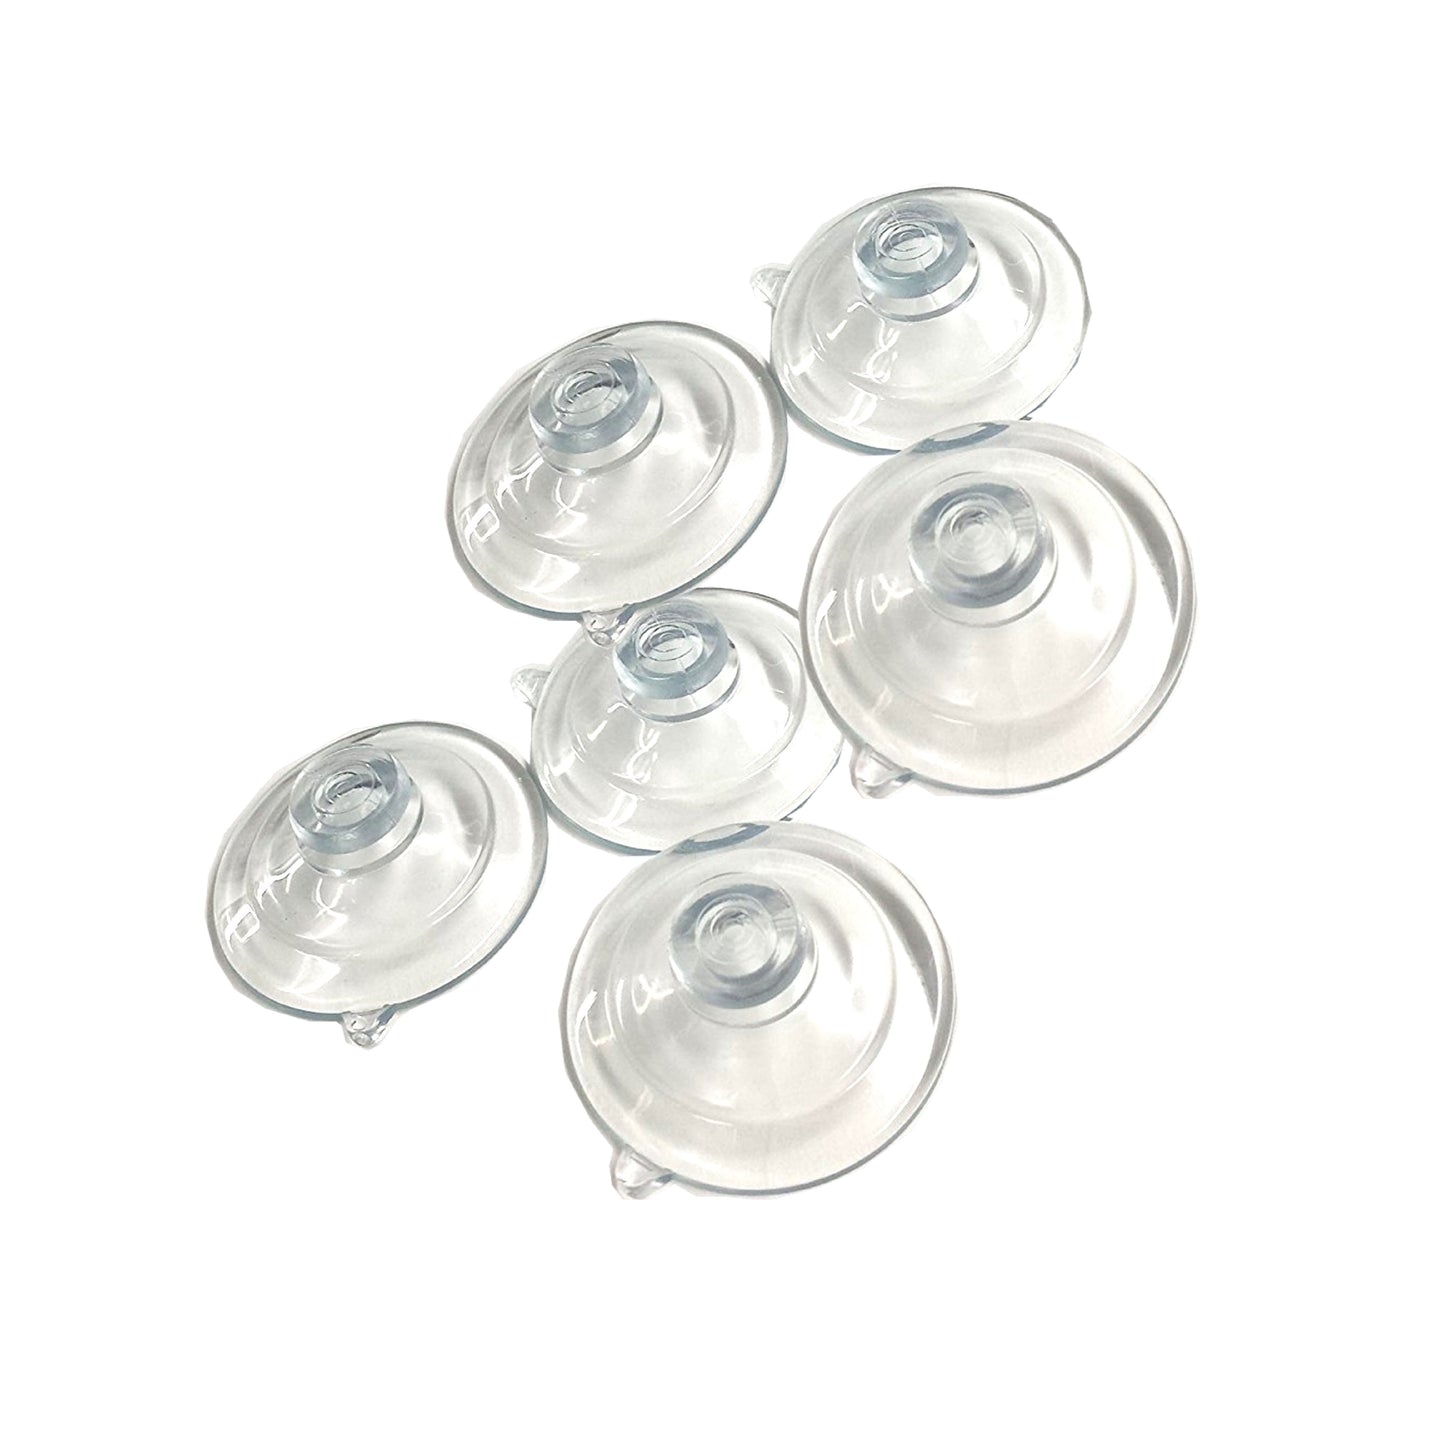 Suction Cup Medium 1.75"- Fits JL Safety EZ Pass-Port Holder Clip and for General use. Pack of 6. Industrial Grade & Made in USA